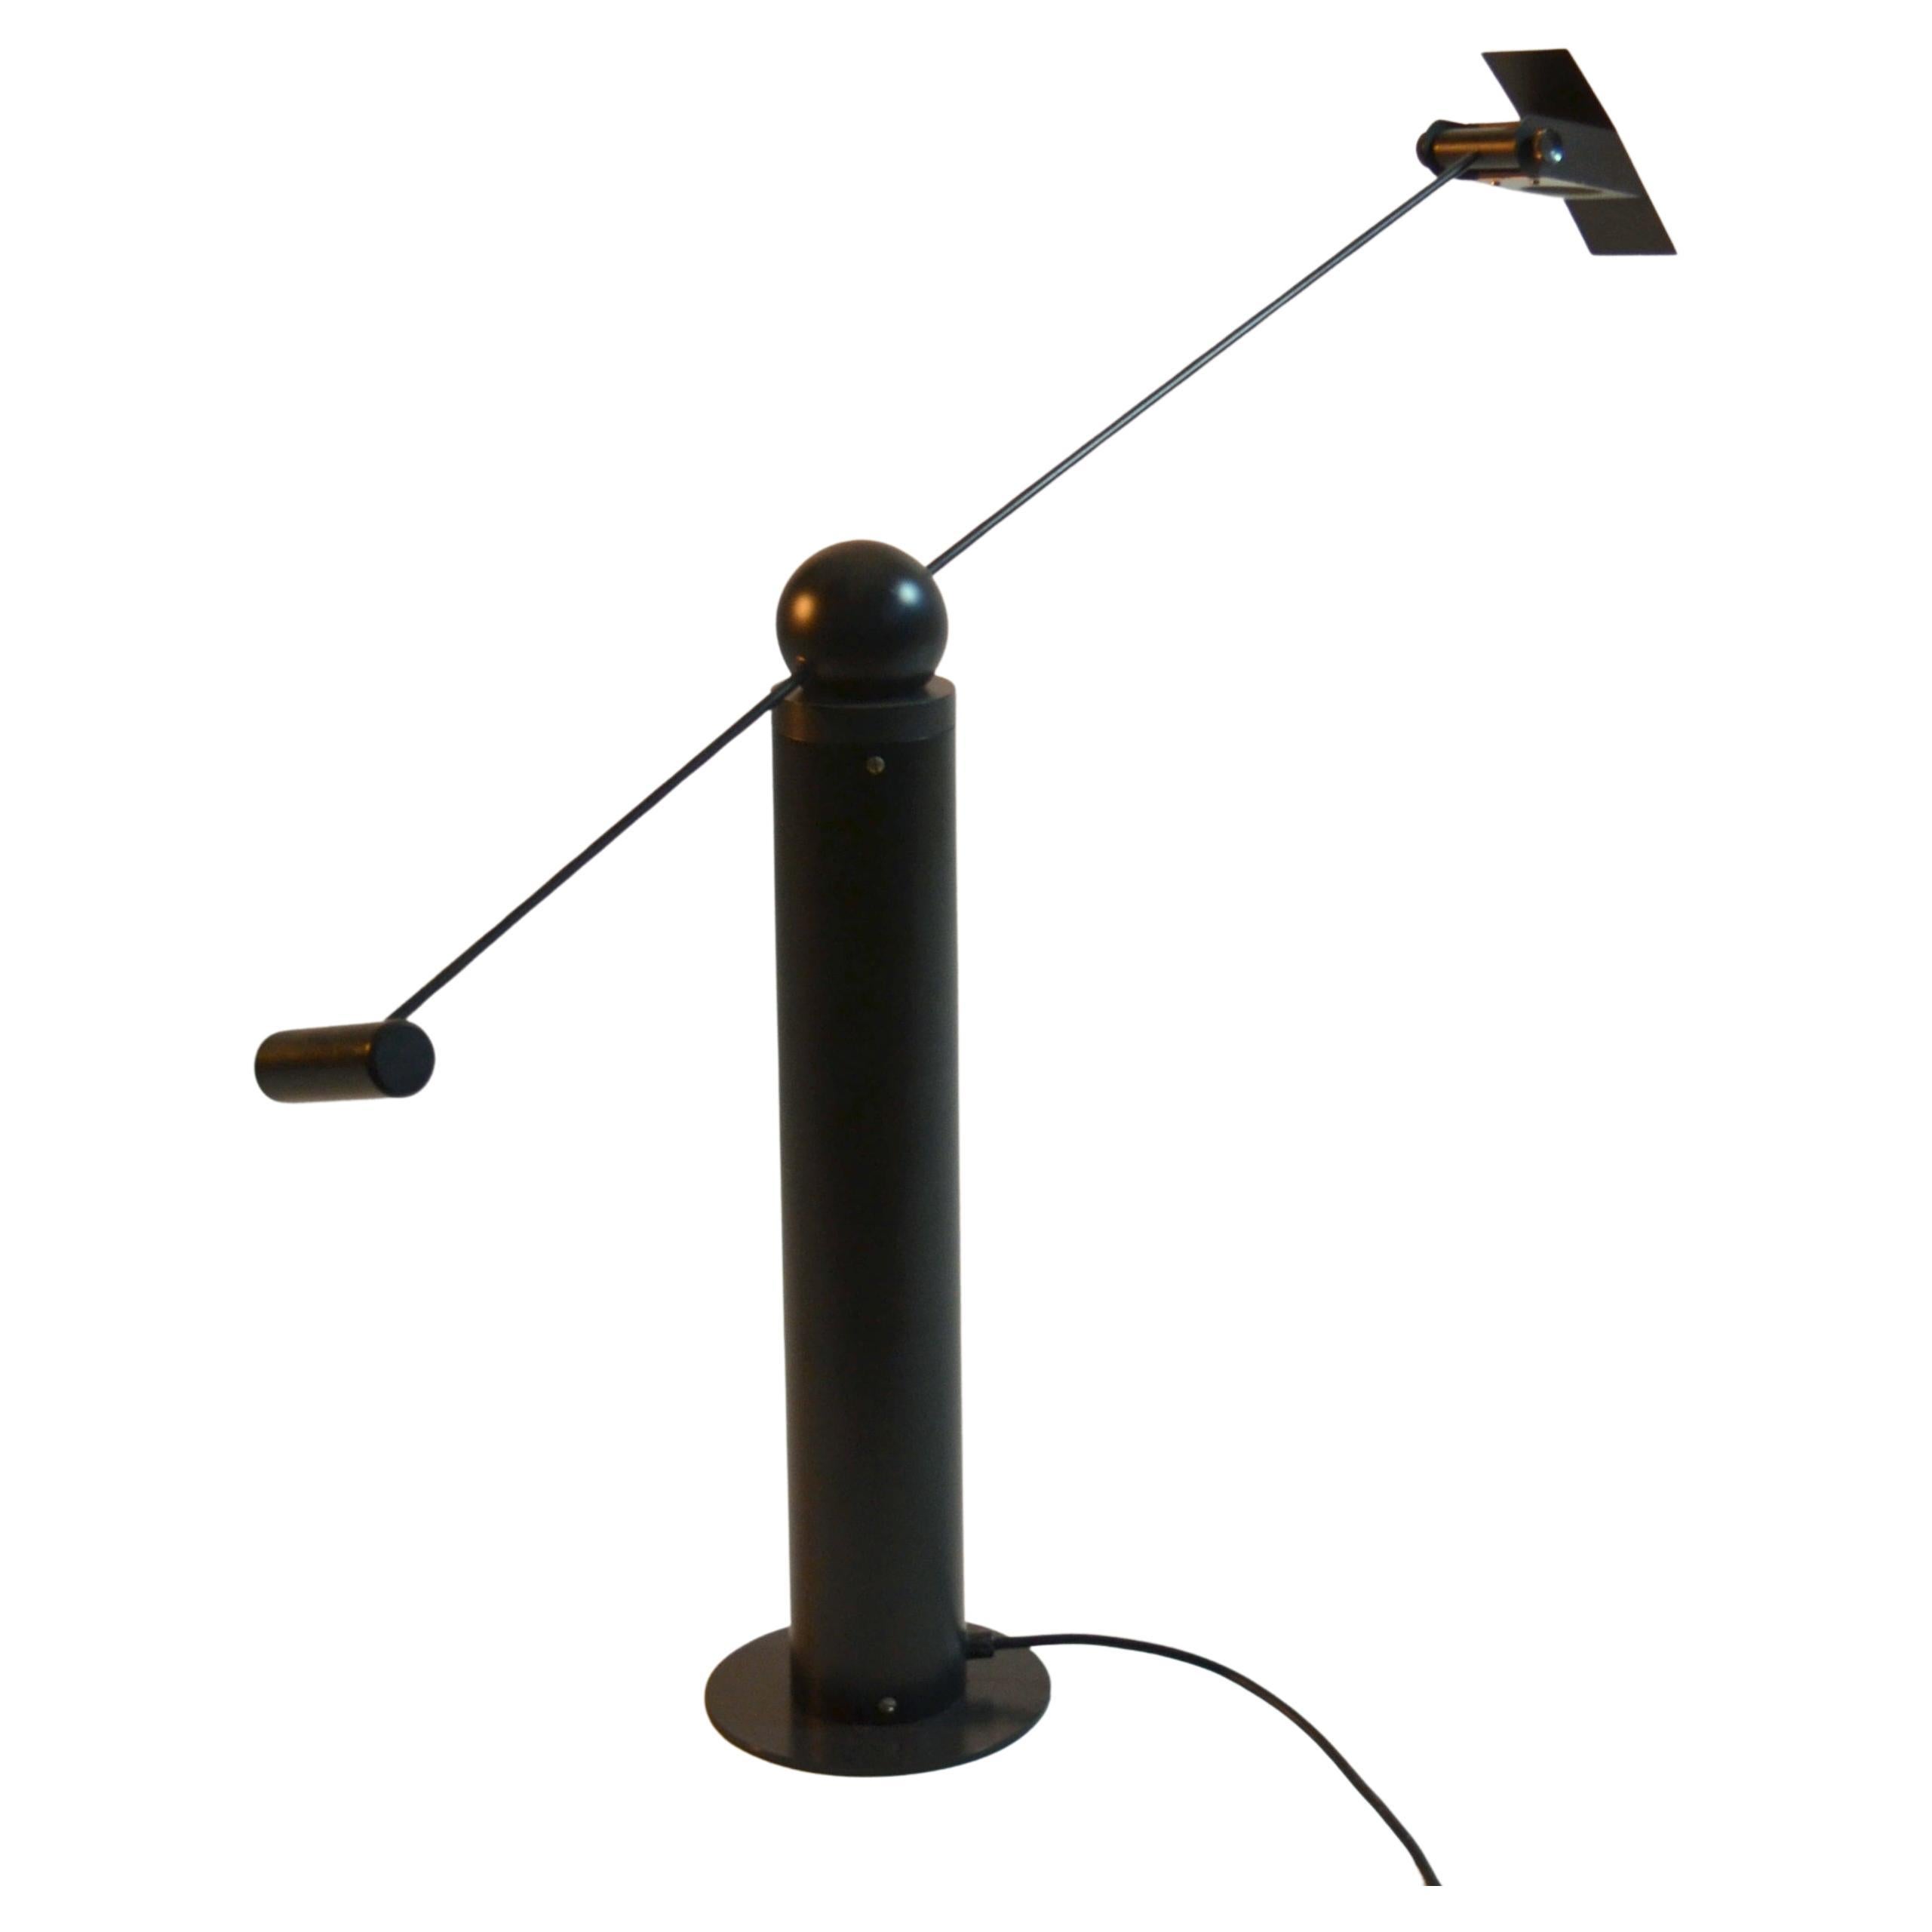 Minimal black metal table lamp with adjustable arm counterbalancing on cylinder base and halogen light source attributed to Rico & Rosemarie Baltensweiler, Switzerland 1970's. The lamp balances on a ball weight resting on a pillar base that allows